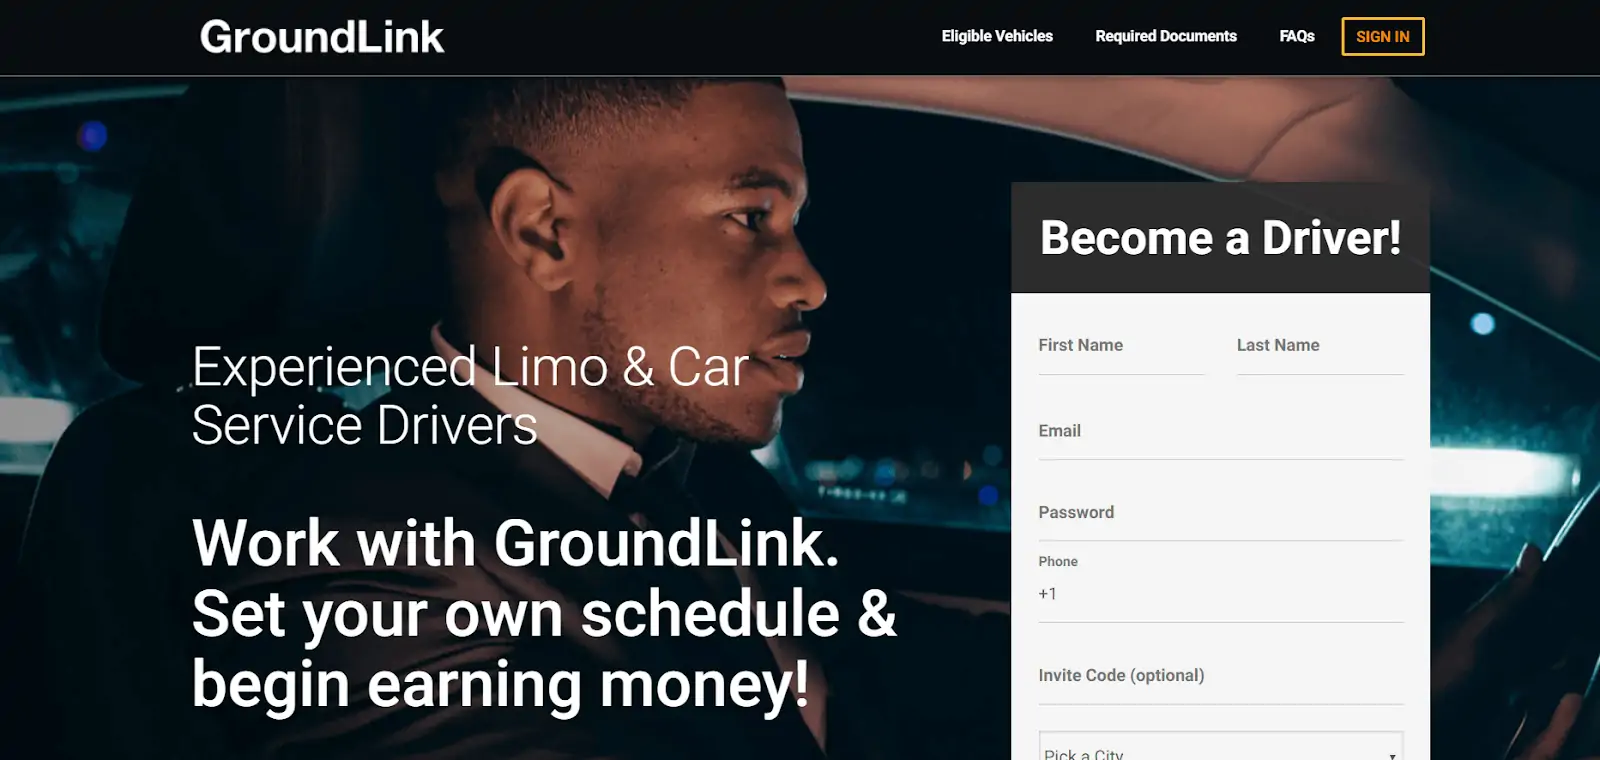 Become a Driver page on GroundLink